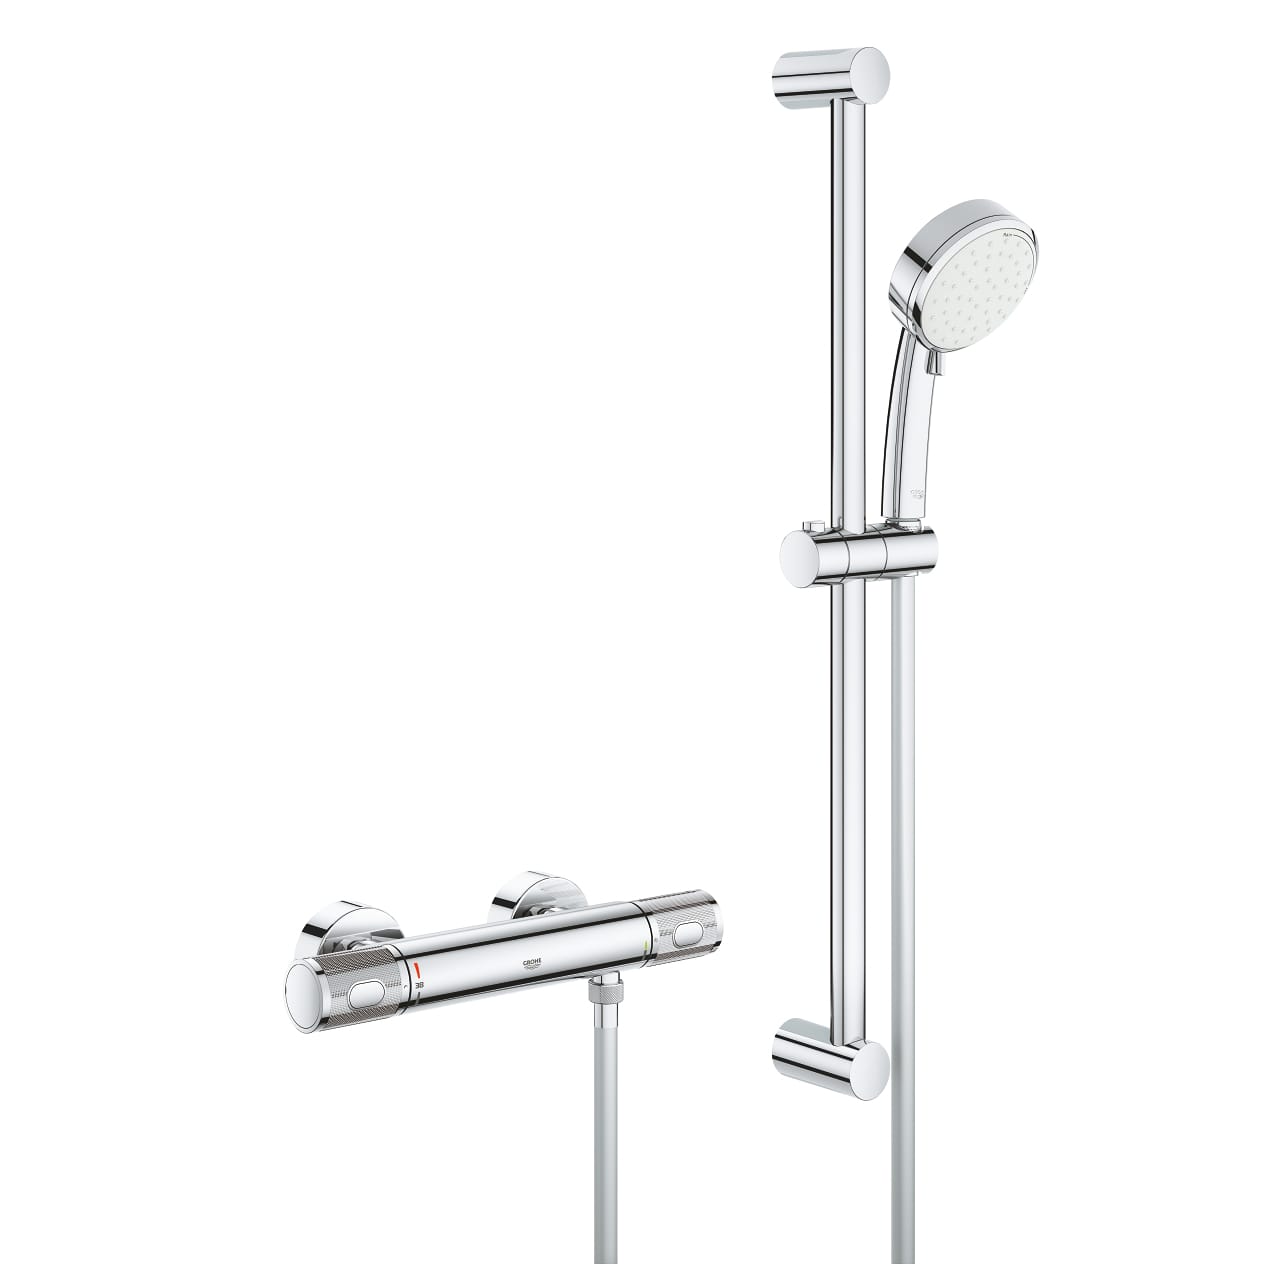 fest operation Barry 34783000 - Grohe Grohtherm 1000 Performance Exposed Thermostatic Shower  Mixer Valve : Bathroom Planet